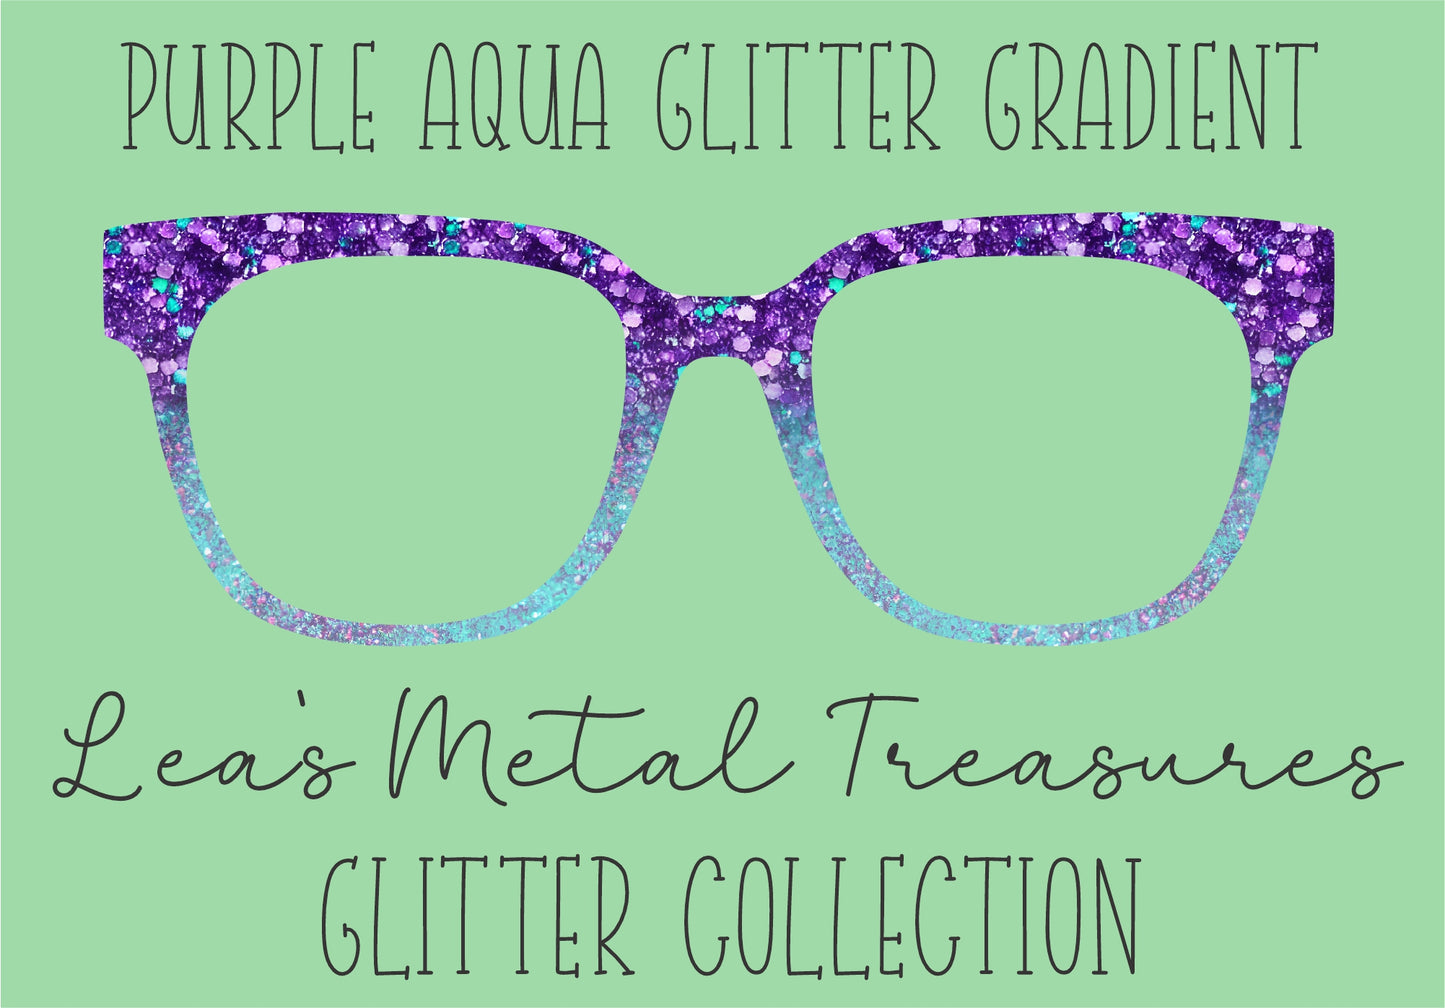 PURPLE AQUA GLITTER GRADIENT Eyewear Frame Toppers COMES WITH MAGNETS